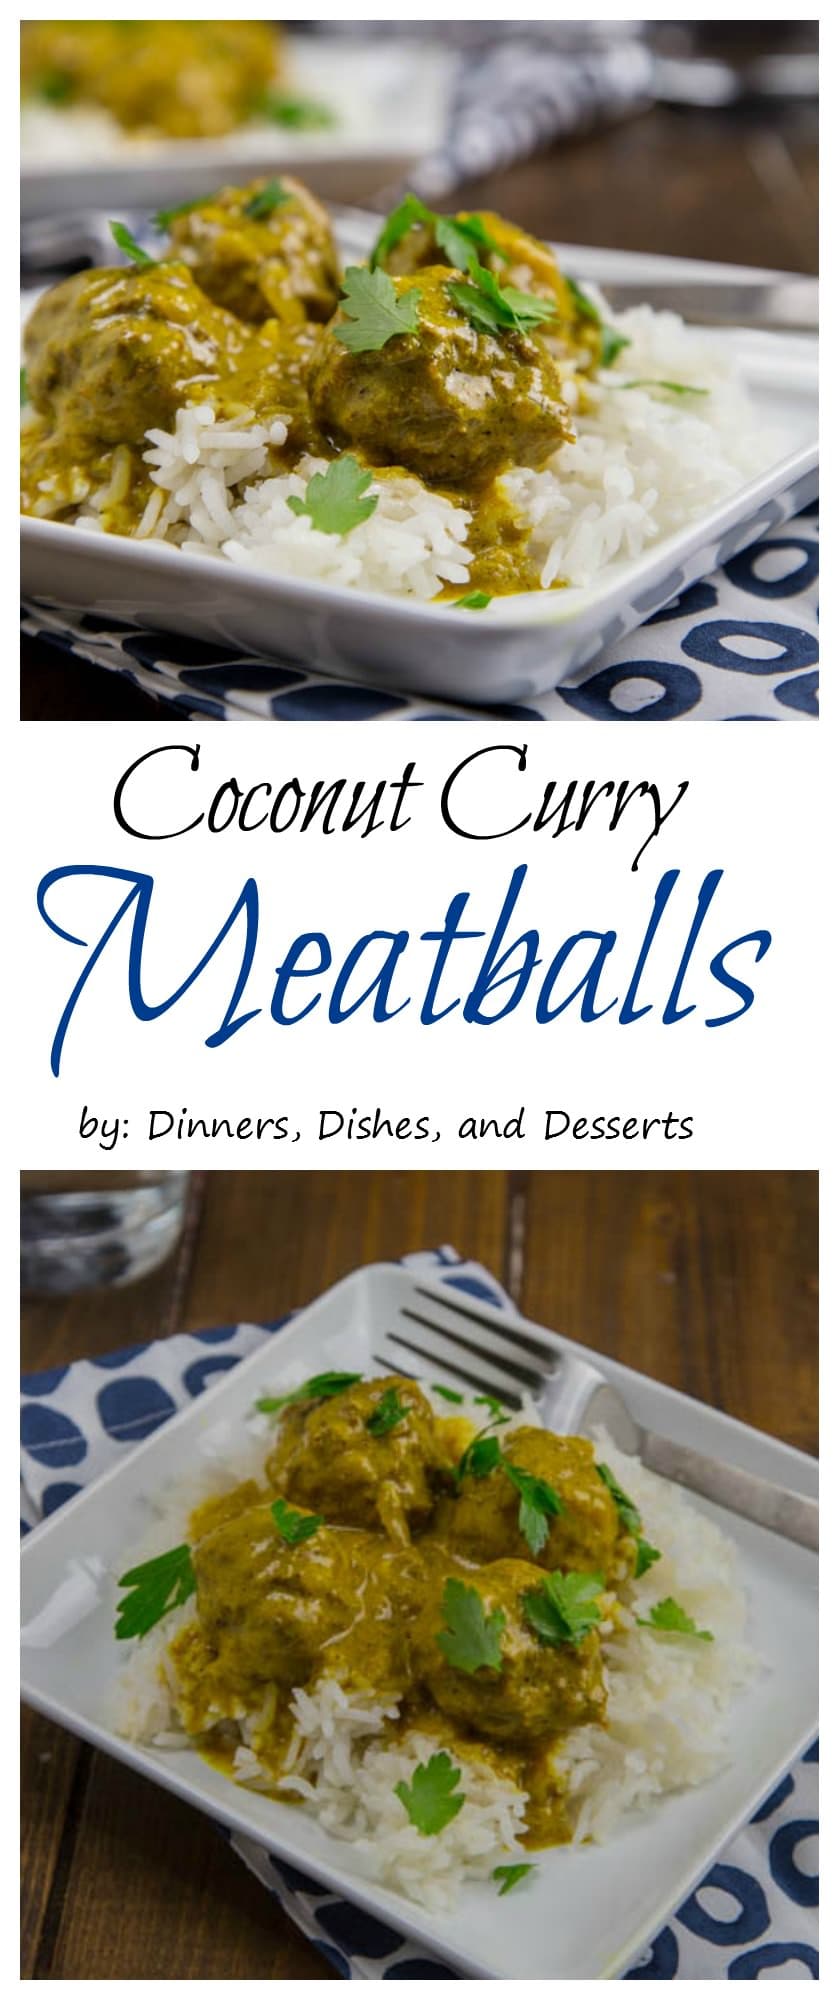 Coconut Curry Meatballs - Tender meatballs in a super flavorful coconut curry sauce. Great over rice or quinoa! And they happen to be Paleo!